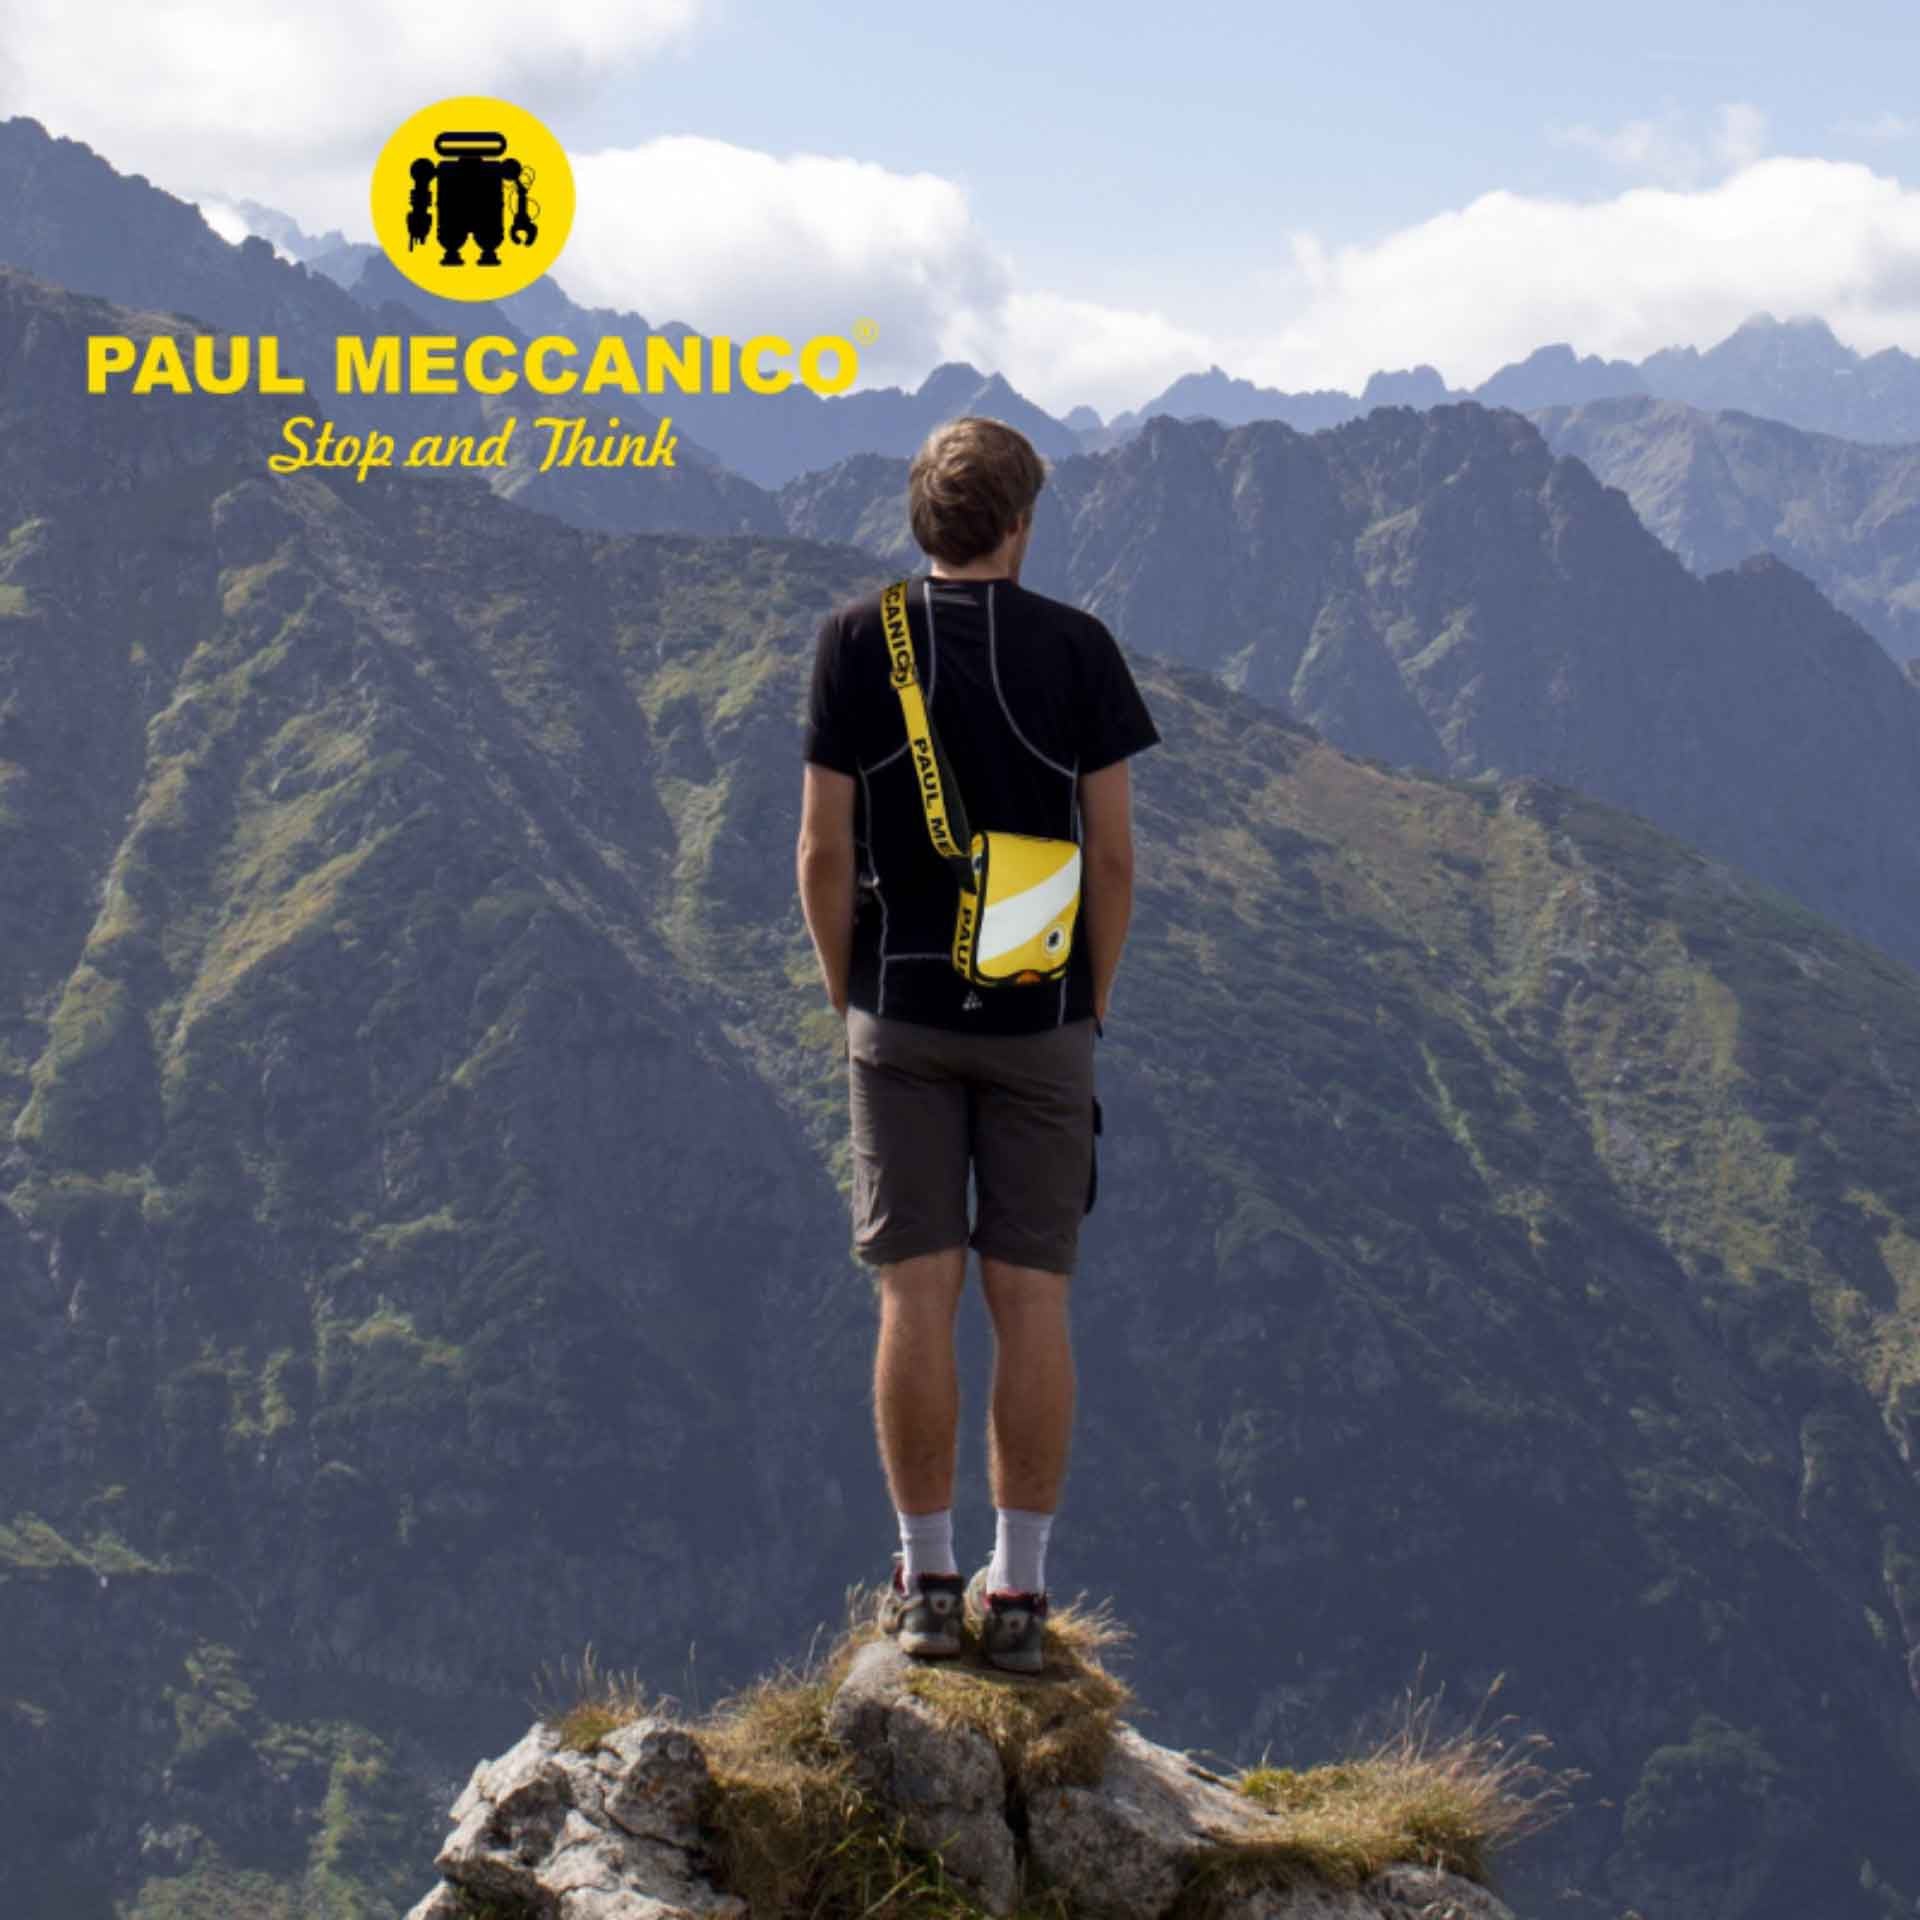 The key features for the men's bag-Paul Meccanico